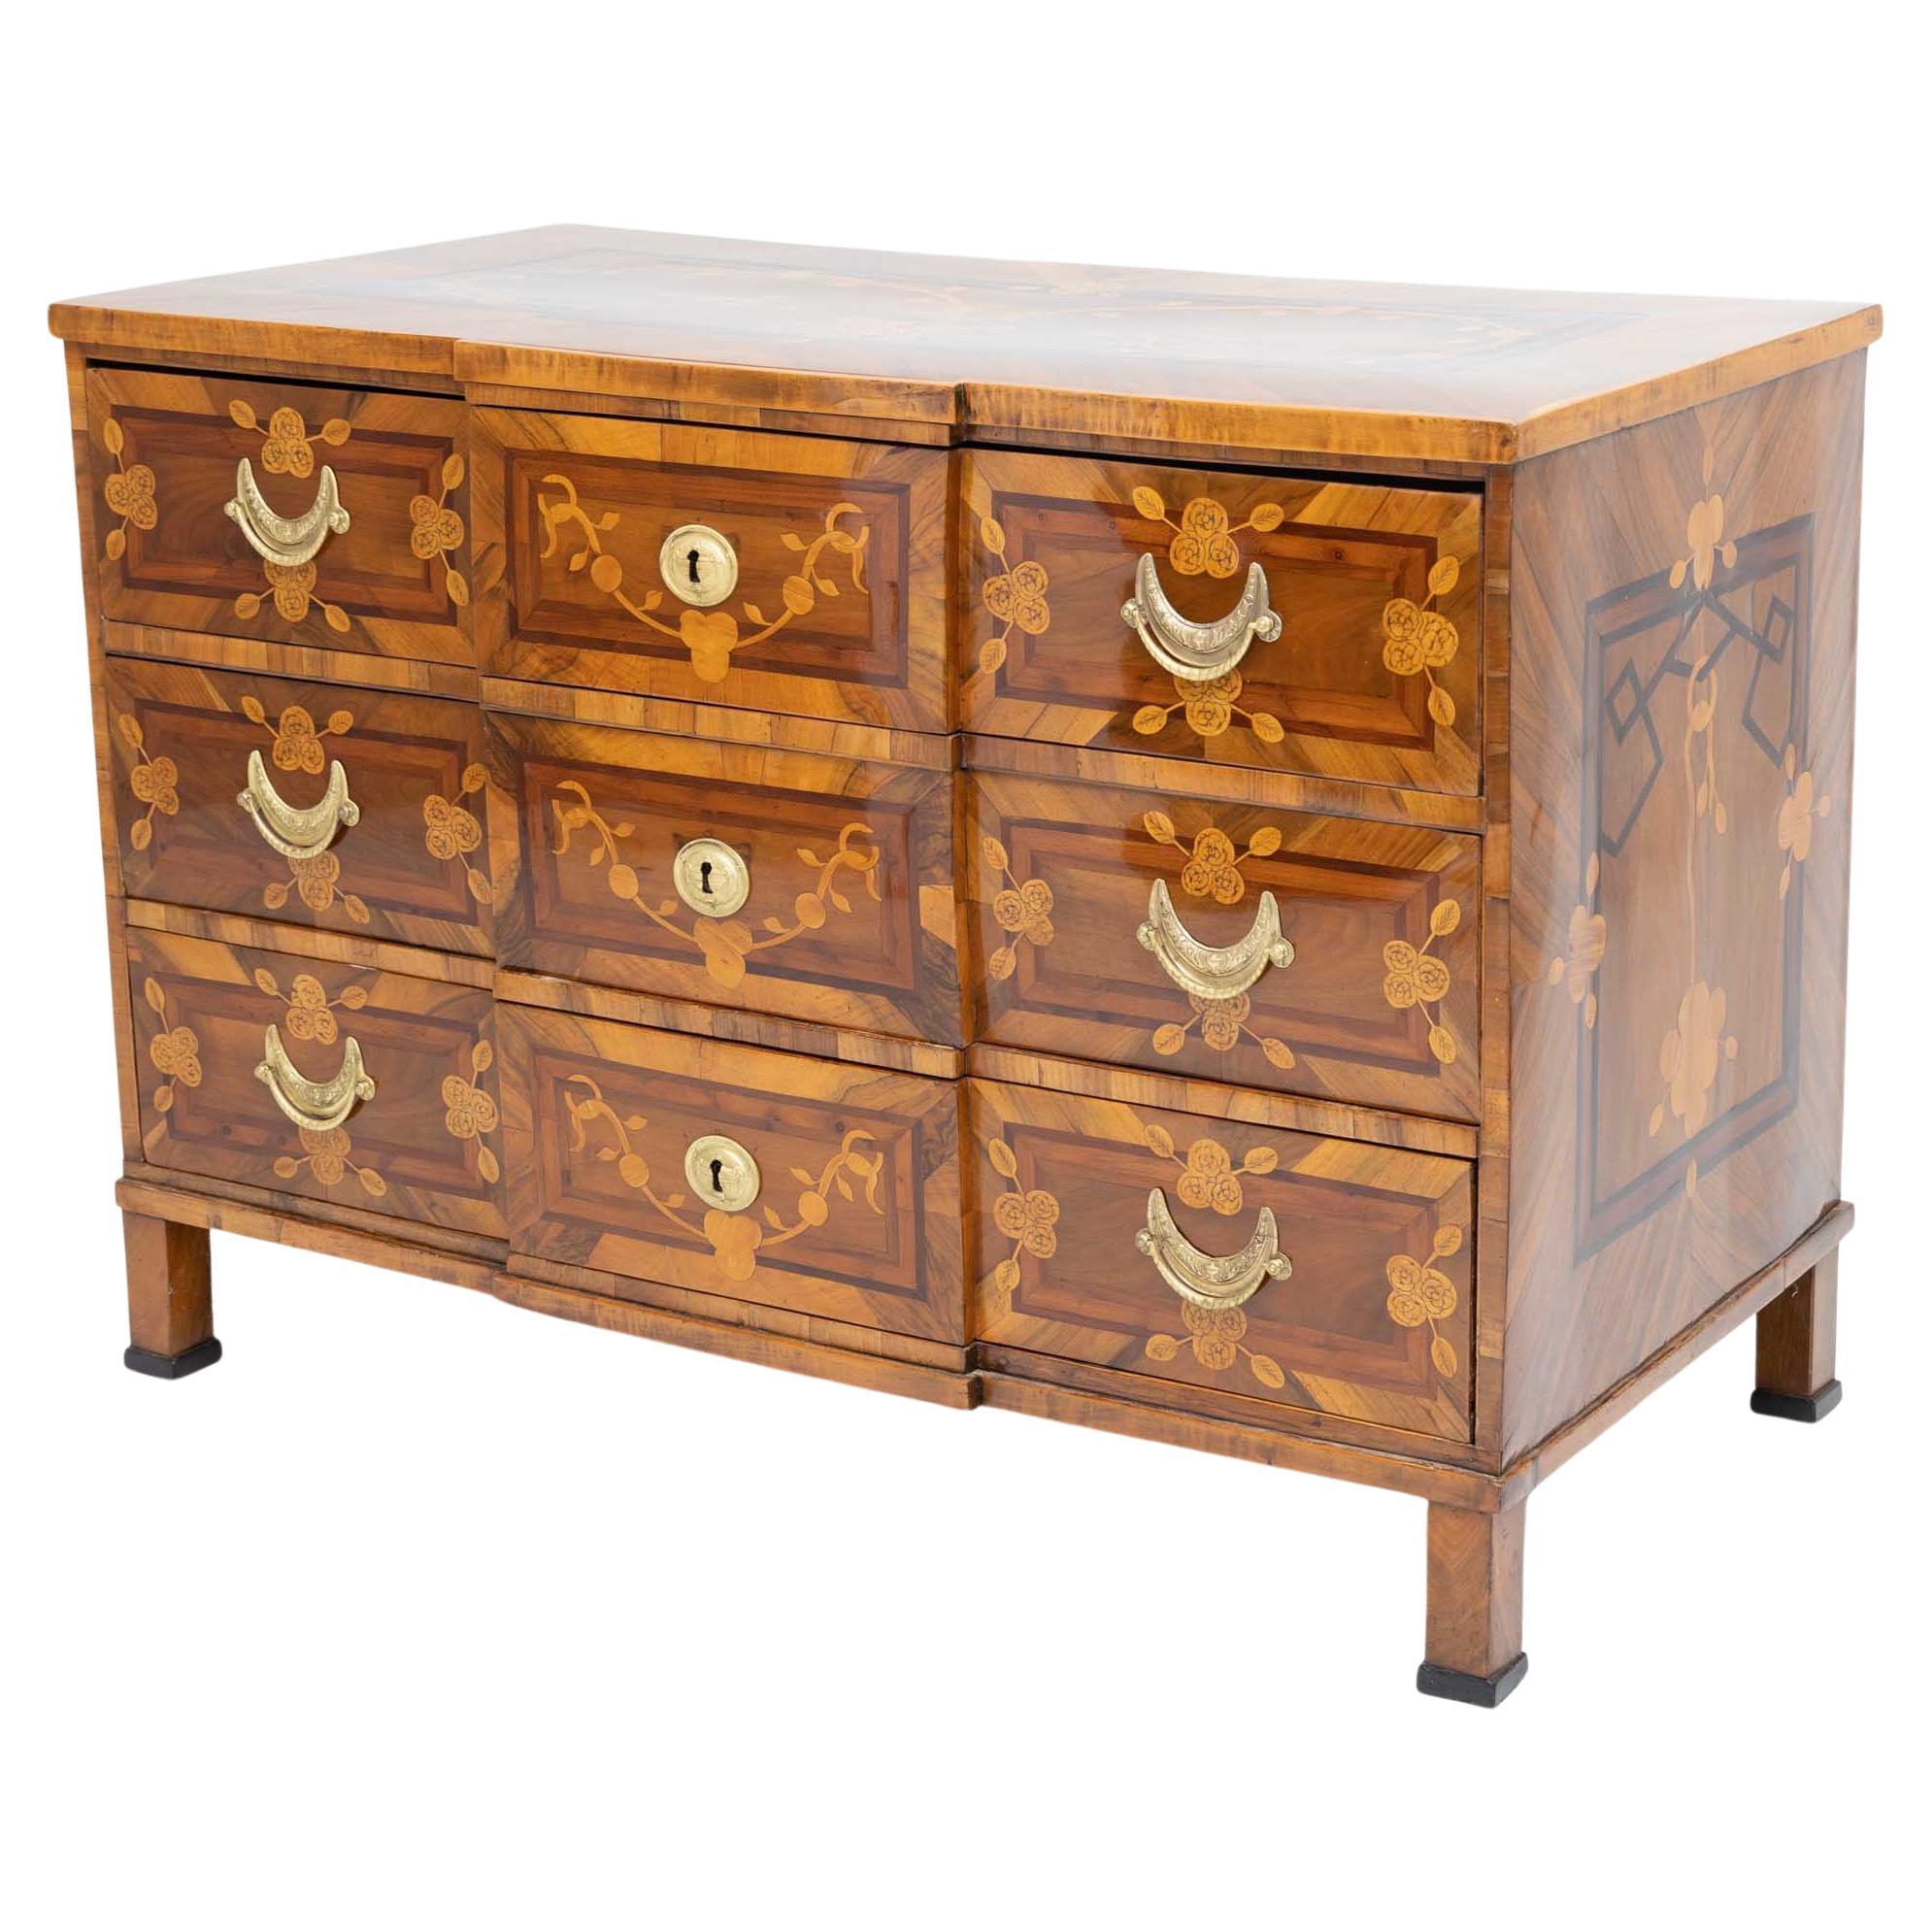 Louis Seize Marquetry Chest of Drawers, Walnut veneered, Late 18th Century For Sale